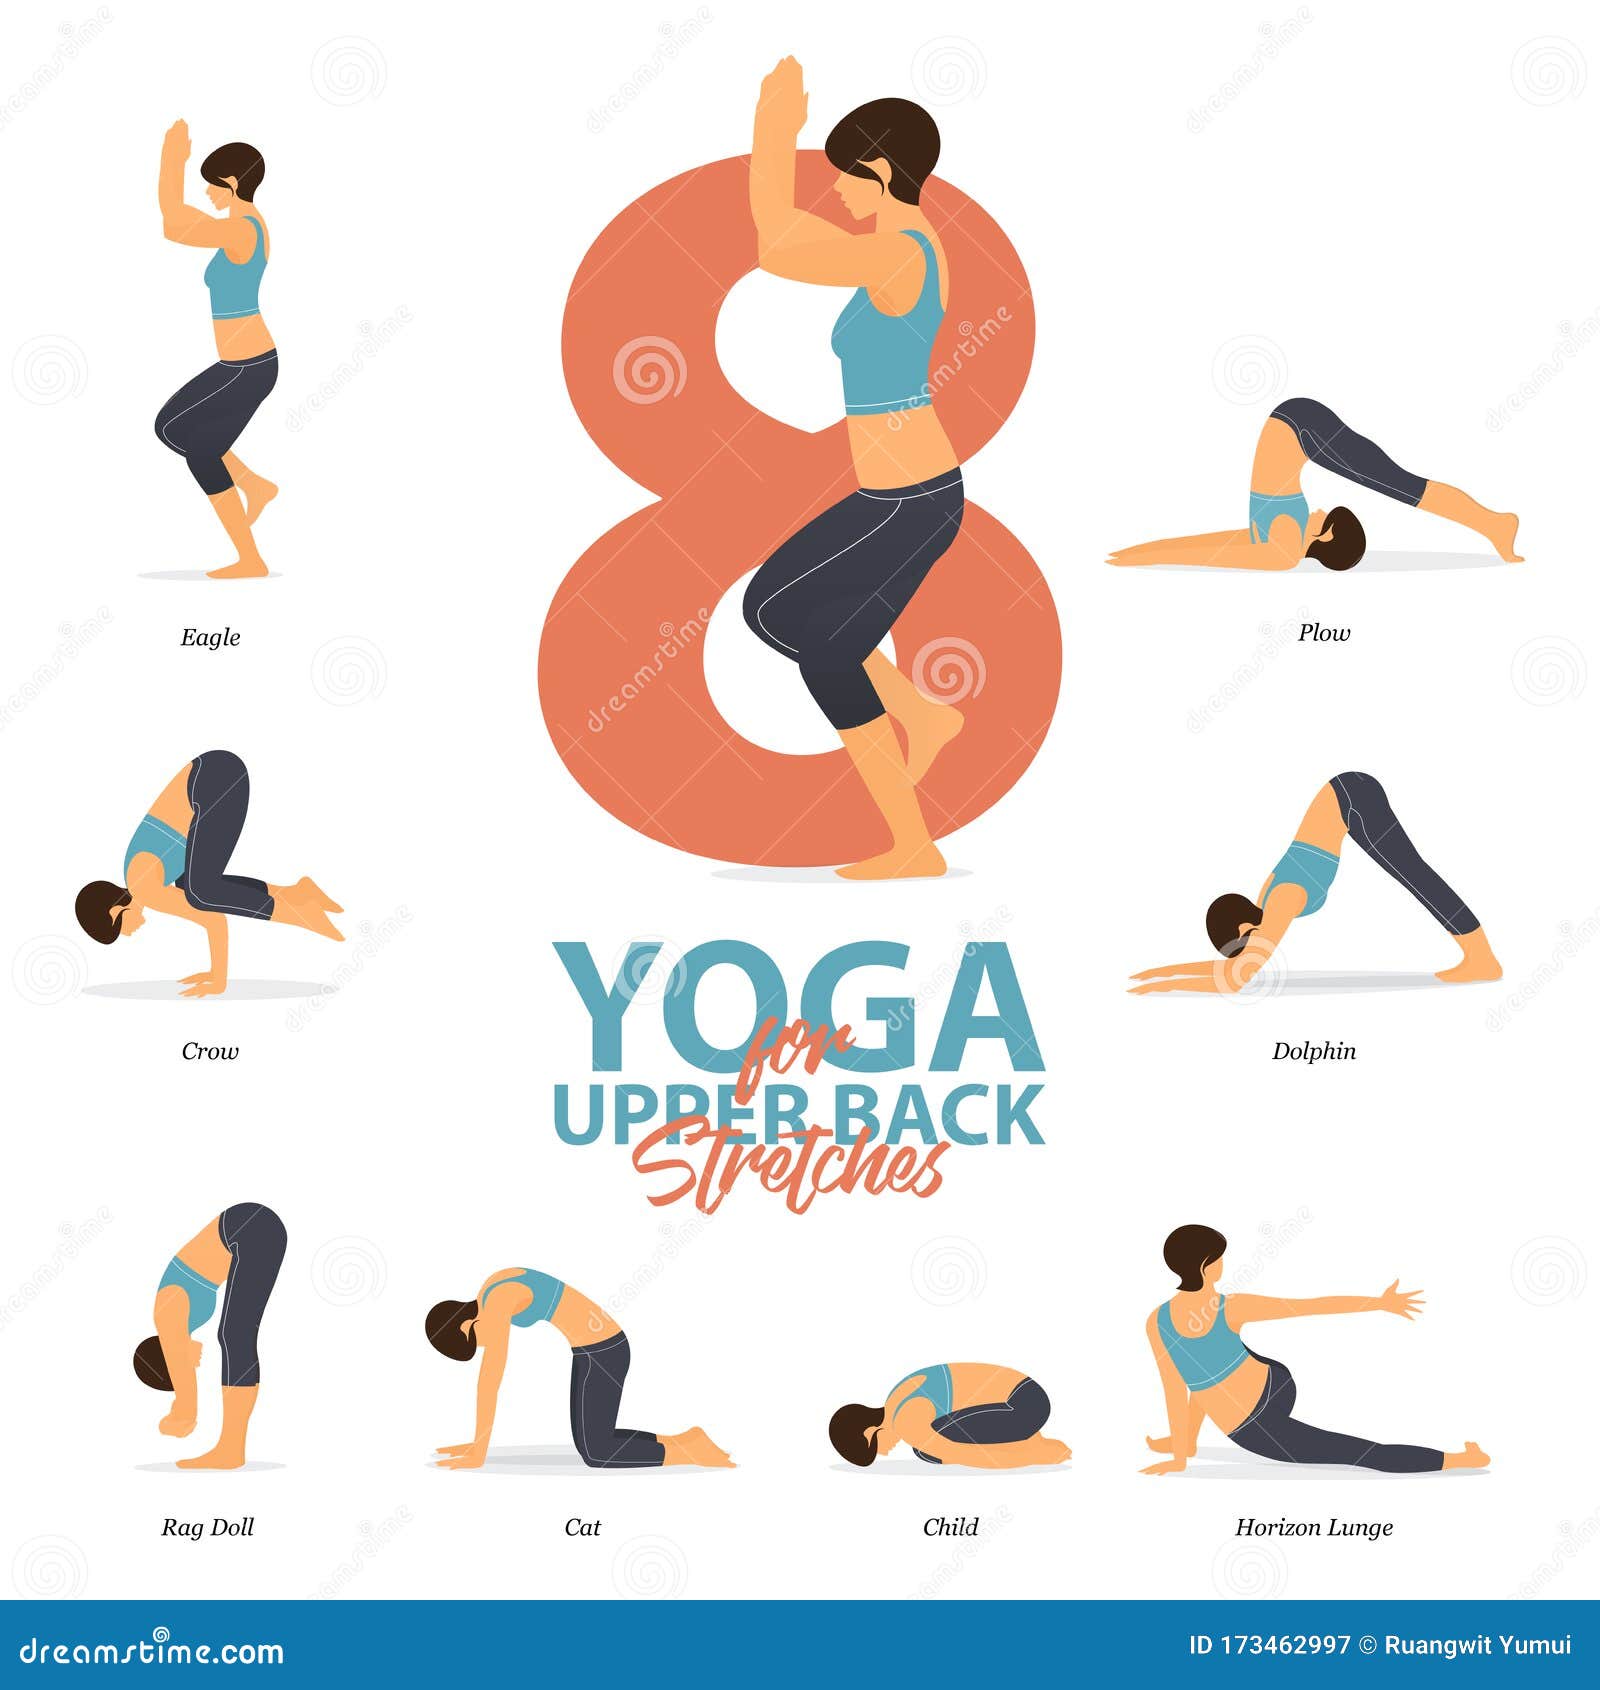 5 Assisted Yoga Poses to Deepen the Stretch - Yoga Pose